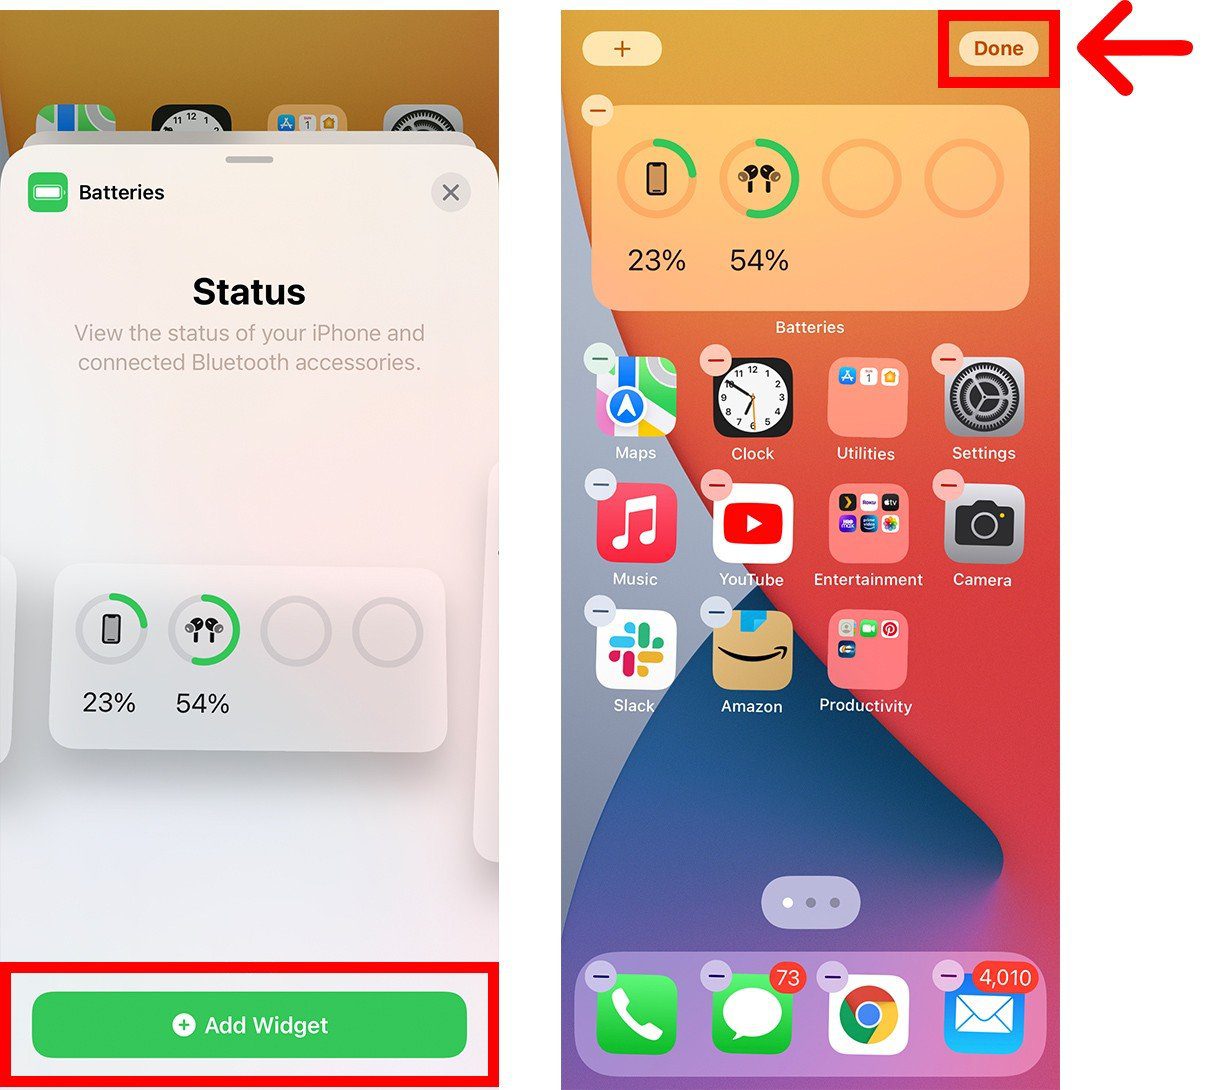 How to Add Widgets on Your iPhone